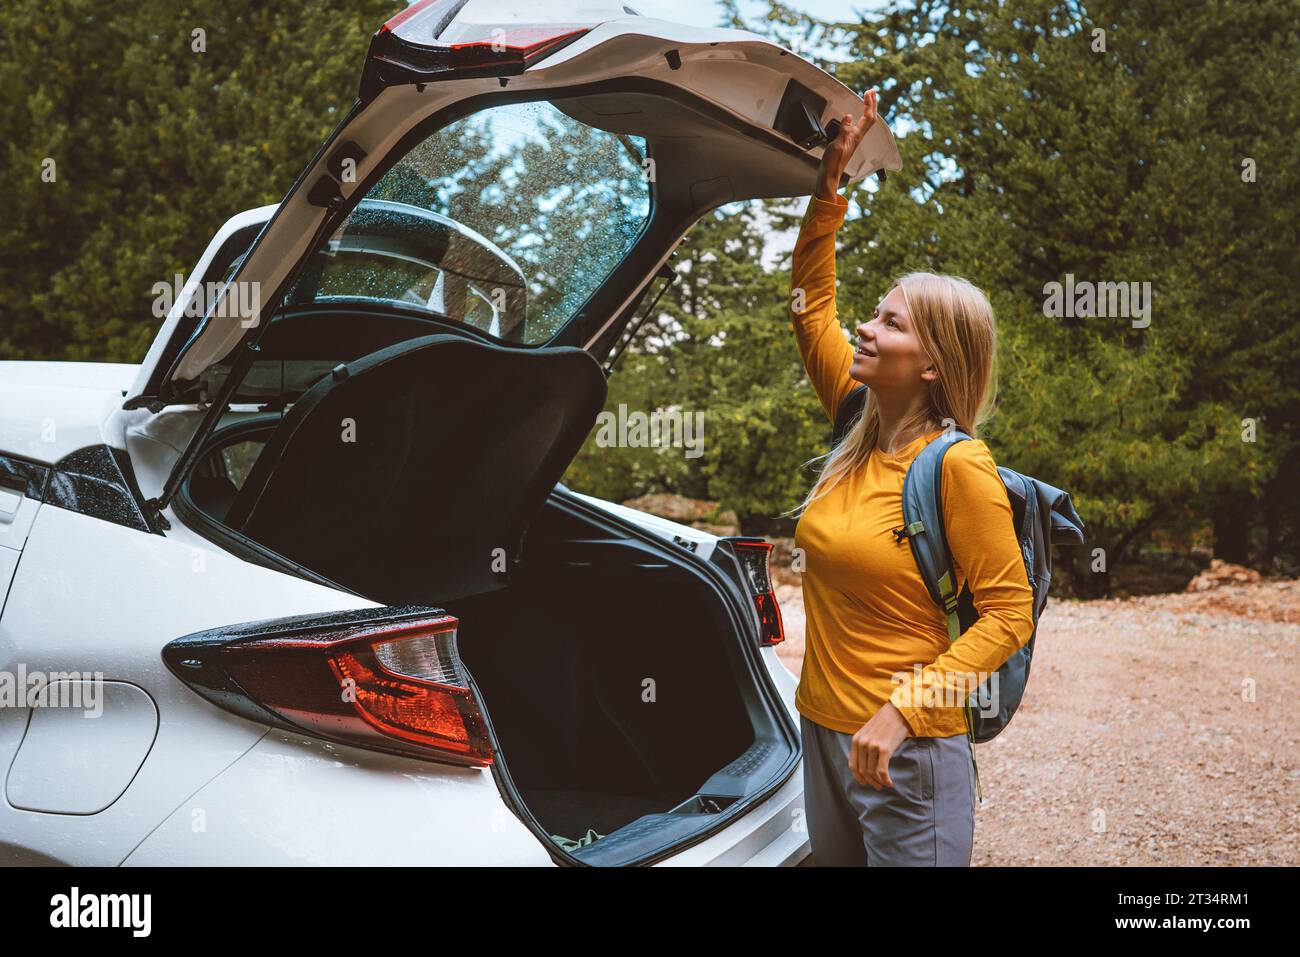 Woman driver traveling by car. Girl opens trunk. Road trip with rental auto summer vacations transport insurance concept Stock Photo